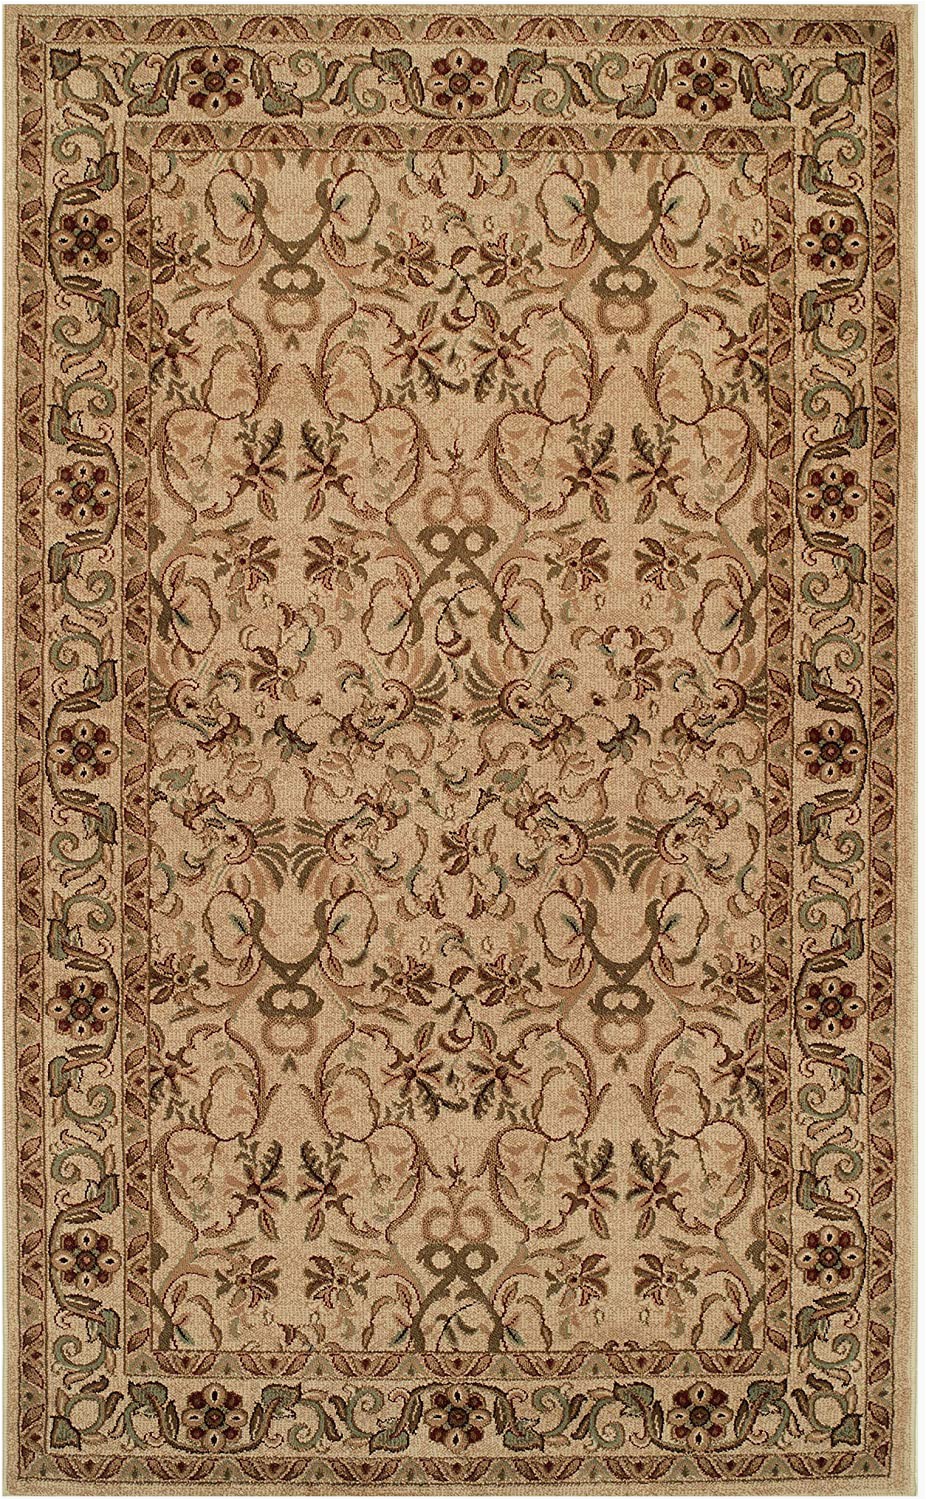 Discount area Rugs Las Vegas Superior Heritage 8 X 10 Ivory area Rug Contemporary Living Room & Bedroom area Rug Anti Static and Water Repellent for Residential or Mercial